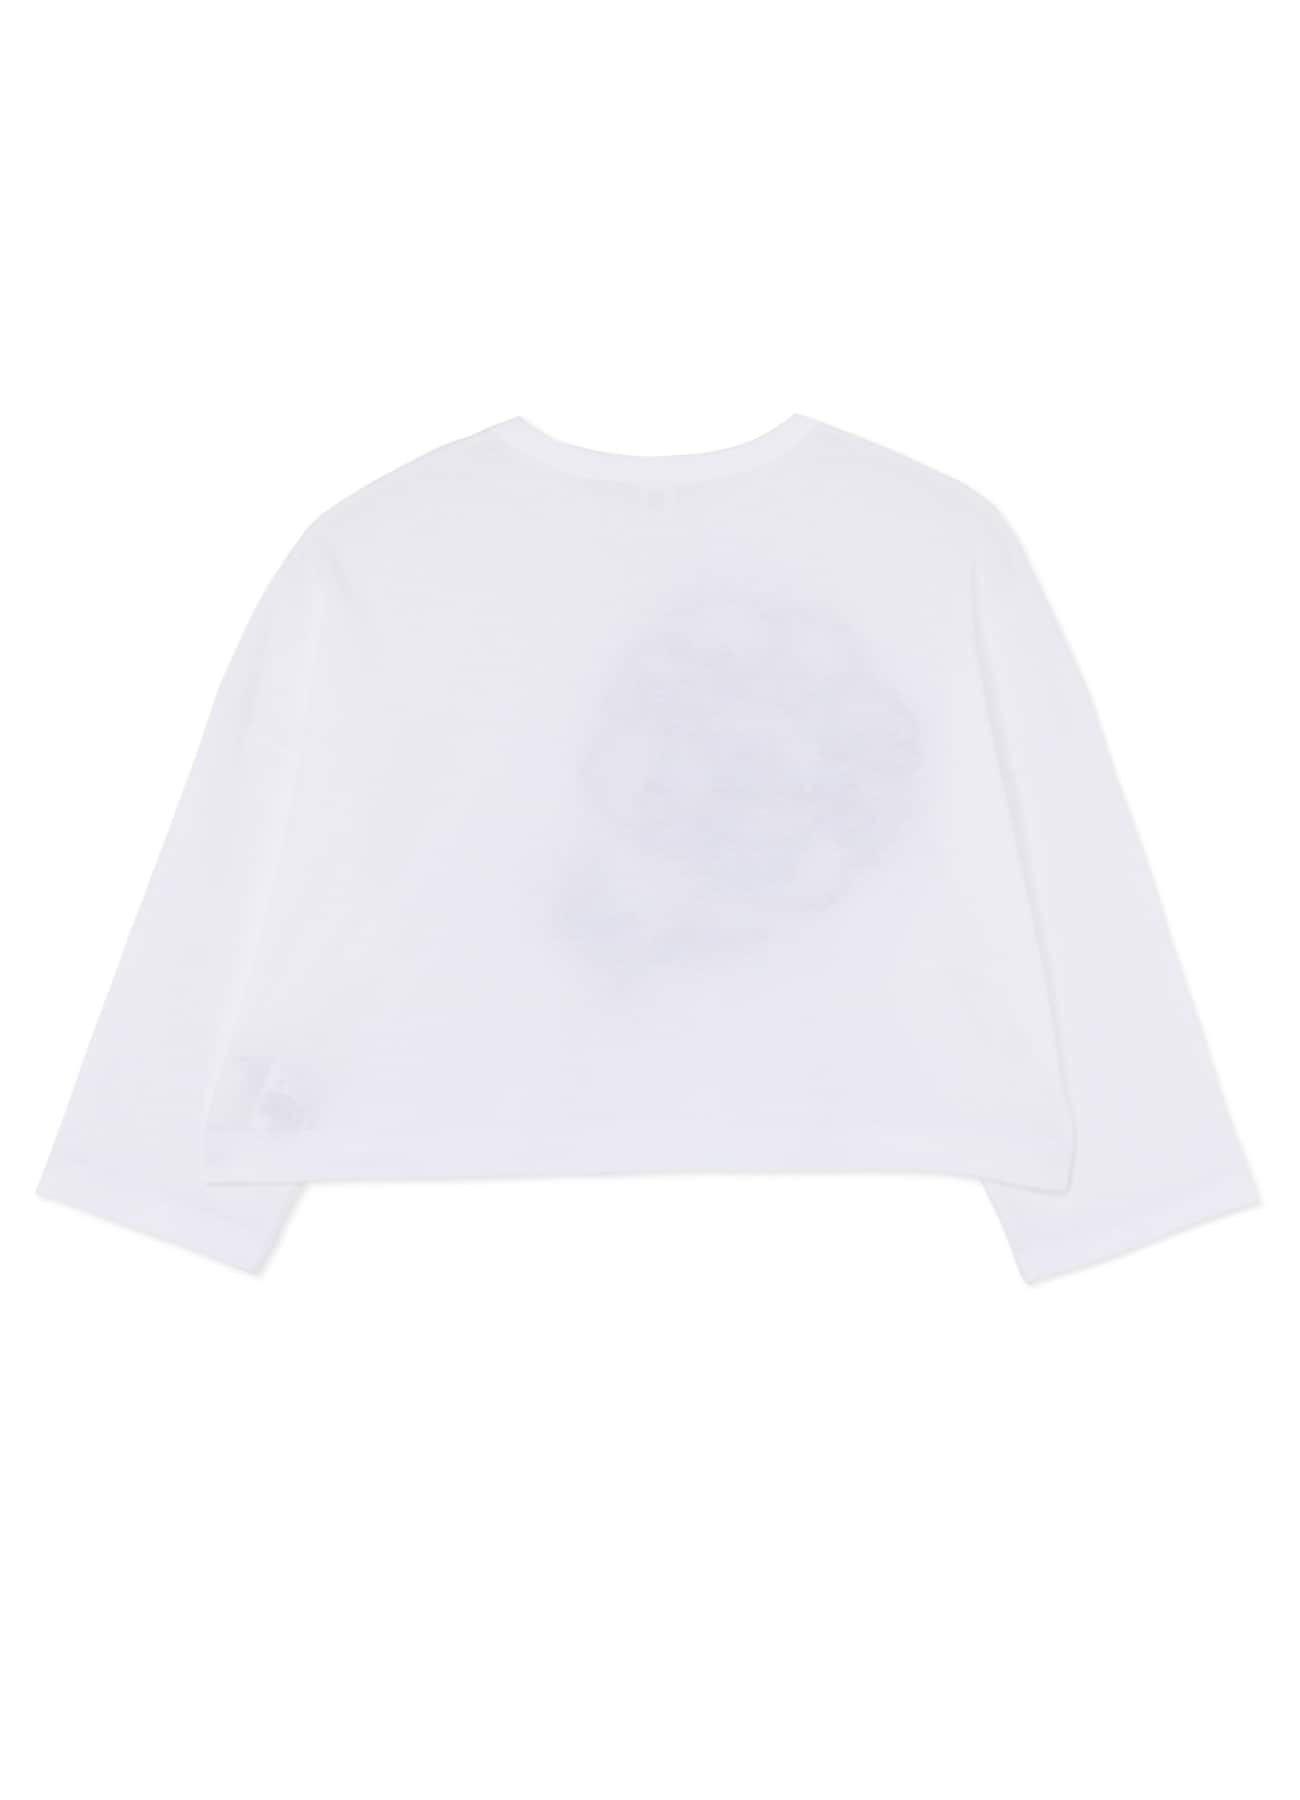 [Y’s KHADI COLLECTION]FLOWER PRINTED CROPPED T-SHIRT